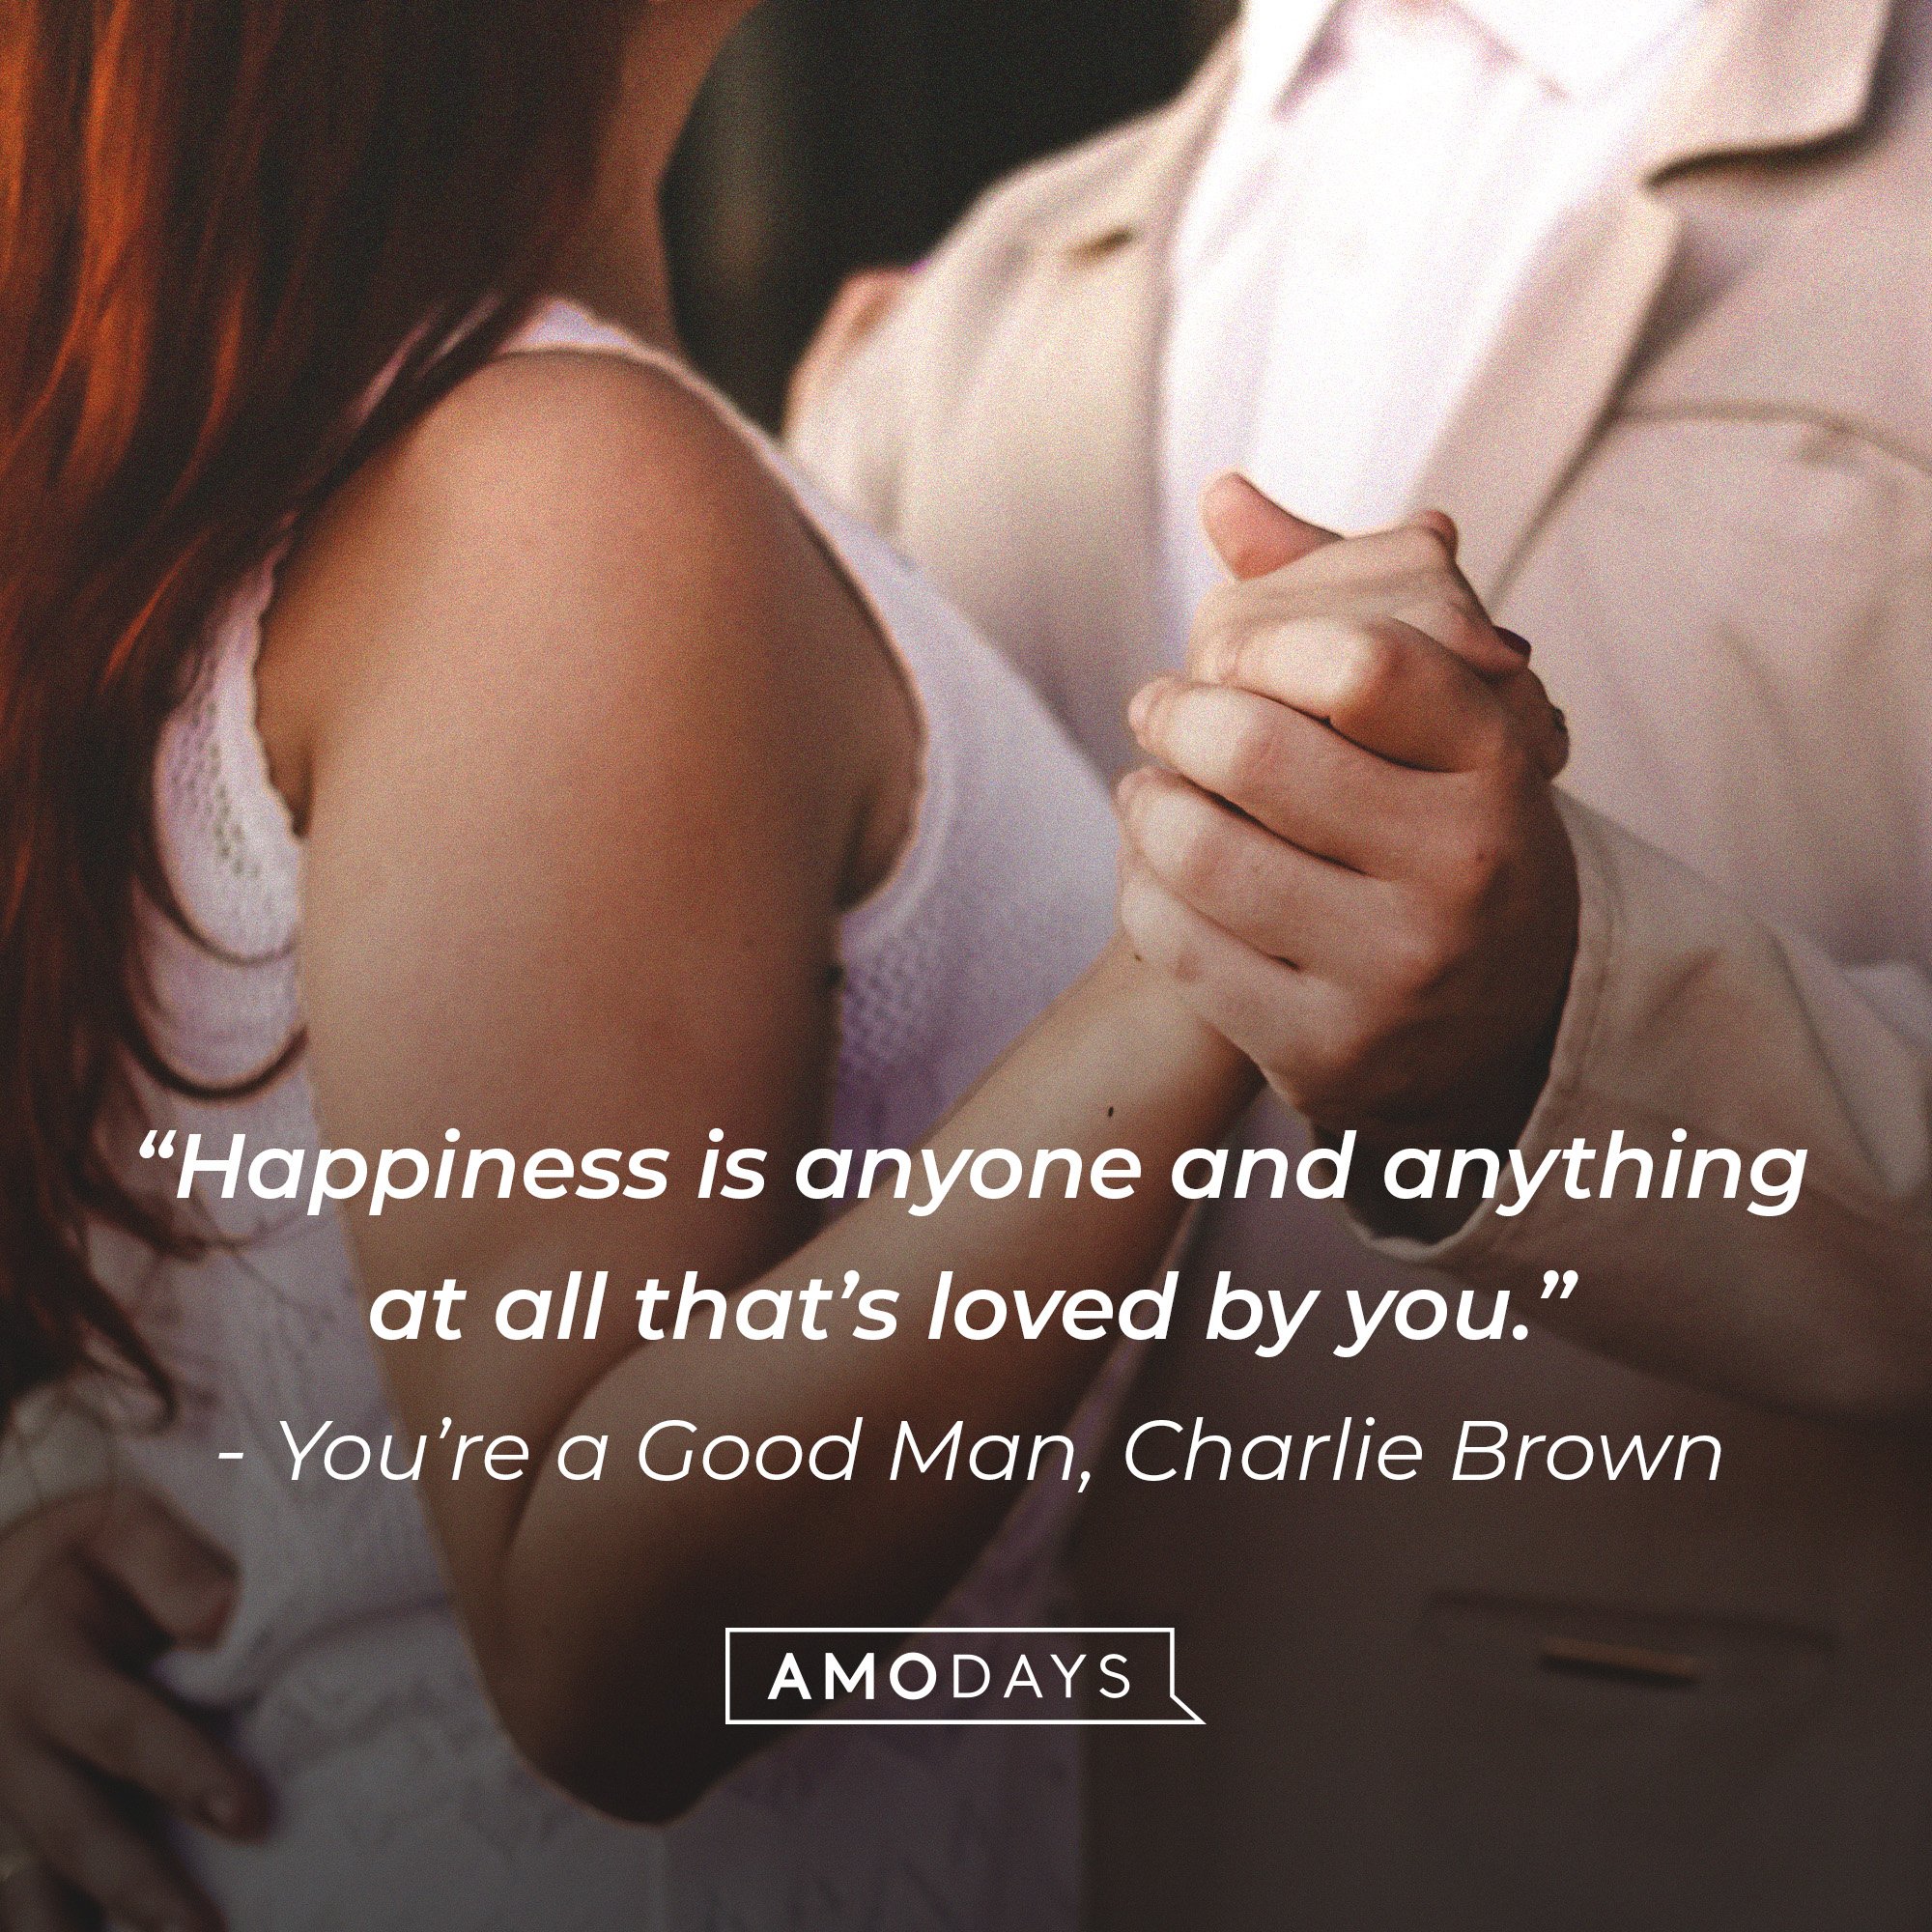 You’re a Good Man, Charlie Brown;s quote: “Happiness is anyone and anything at all that’s loved by you.” | Image: AmoDays